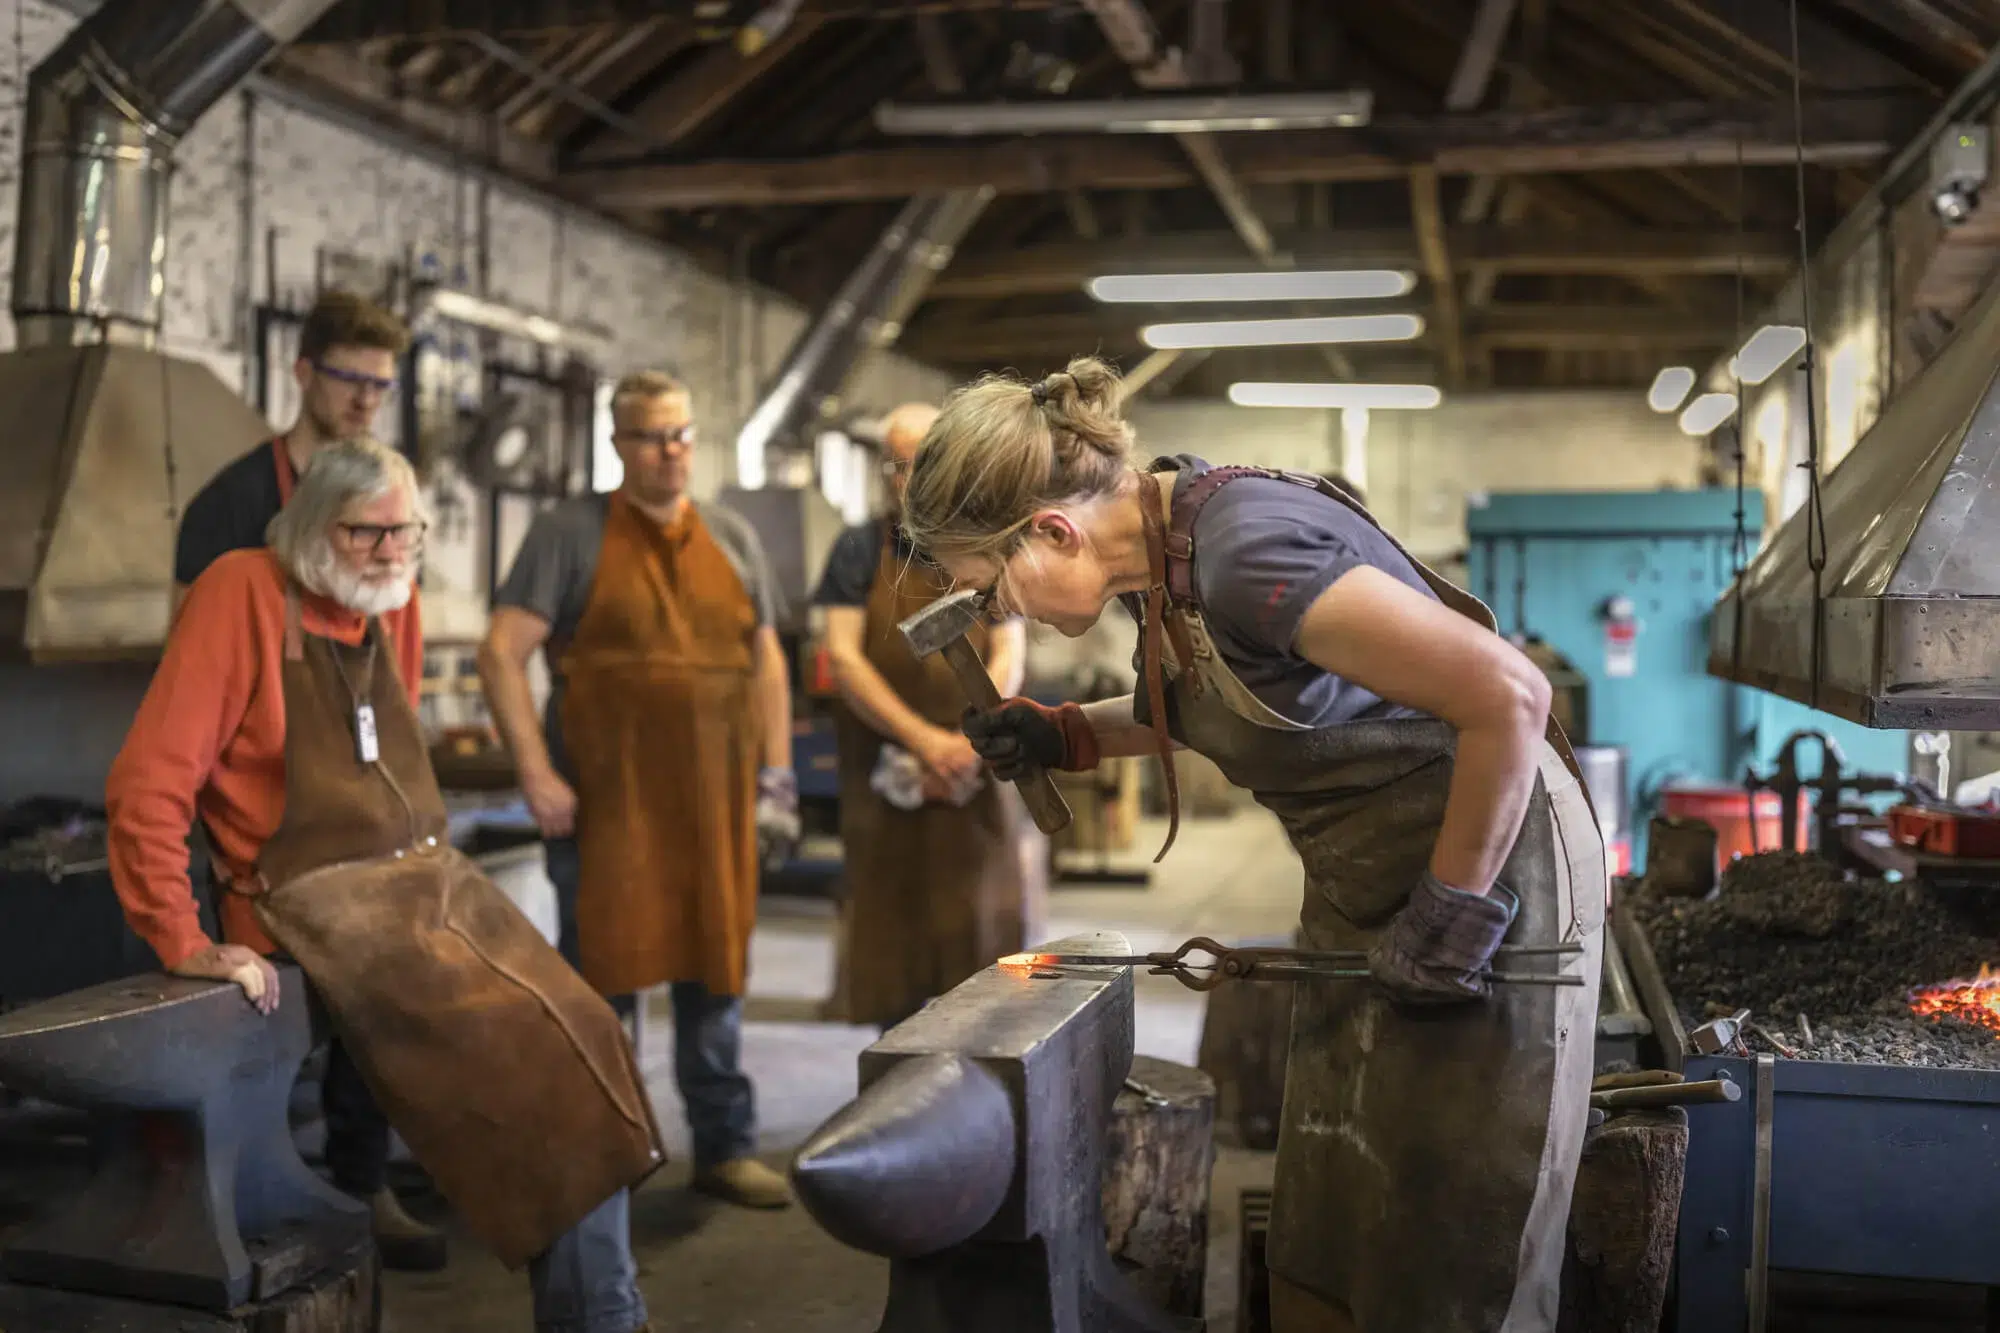 west dean blacksmithing with cara wassenberg. photo by chris ison 14